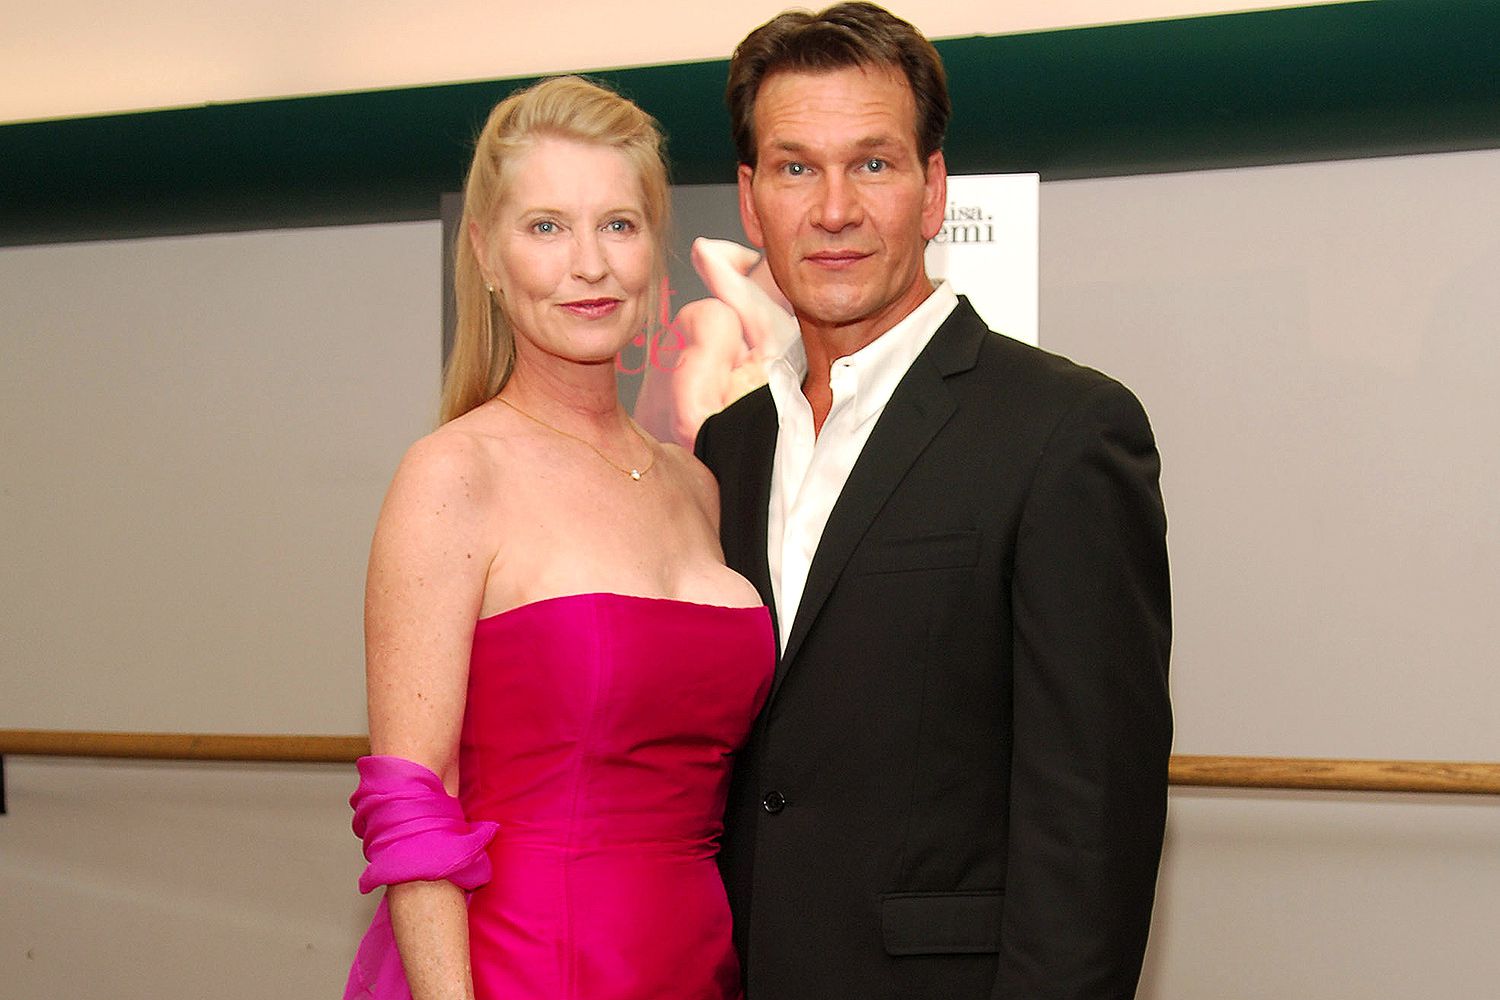 Patrick Swayze’s Widow Recalls Emotional Moment He Learned He Had Cancer [Video]